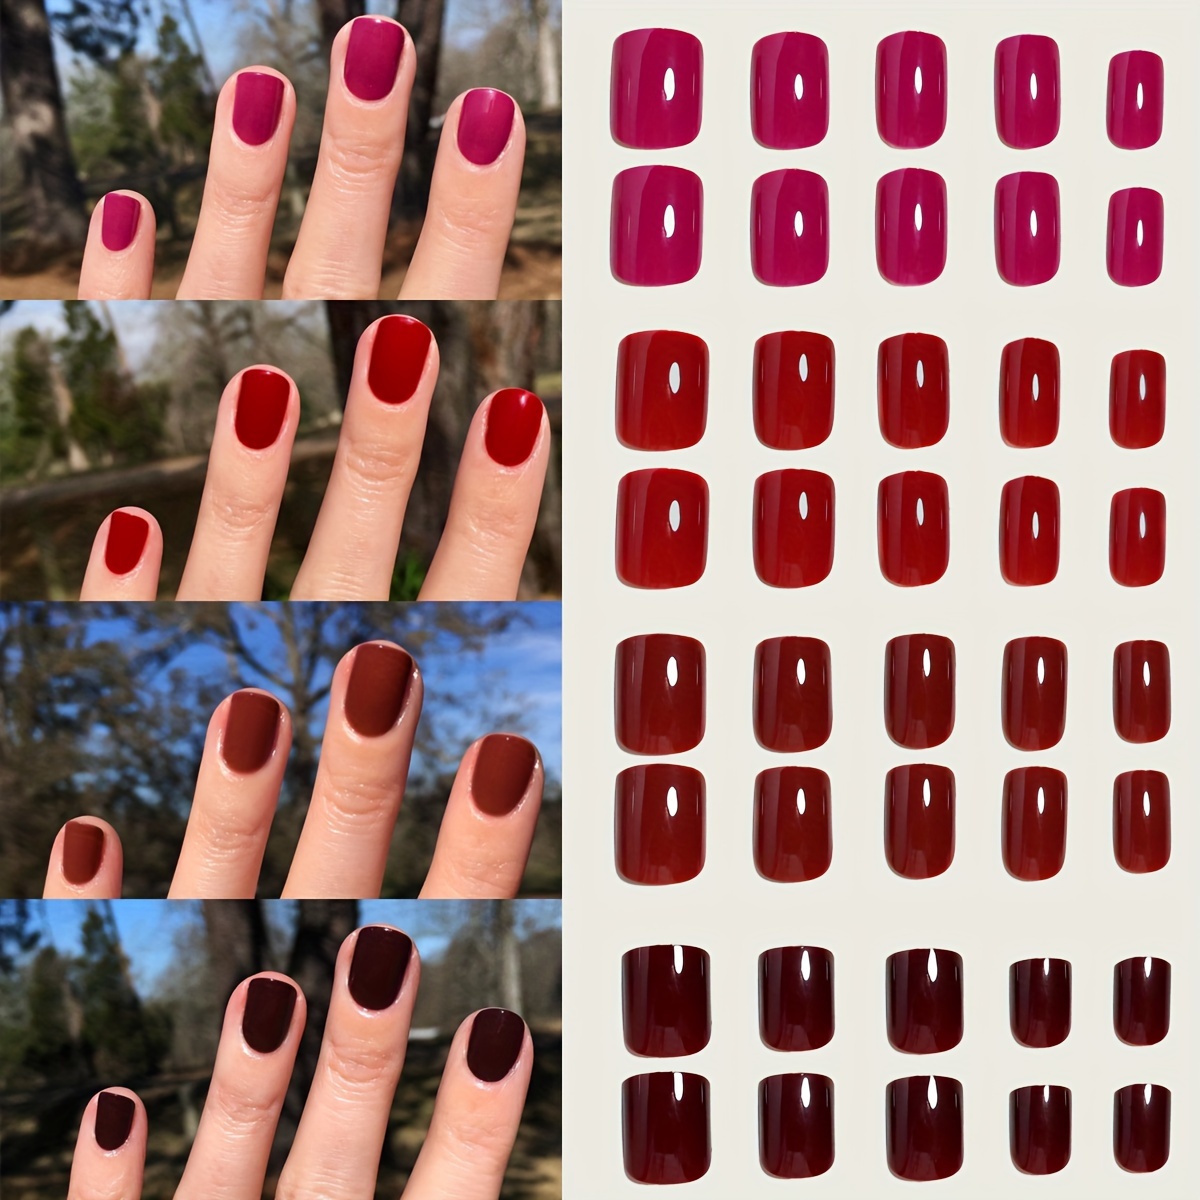 

96pcs Glossy Short Oval Fake Nails, Wine Red Collection Solid Color Press On Nails, Minimalist Style Full Cover False Nails For Women Girls Fall Winter Nail Deco